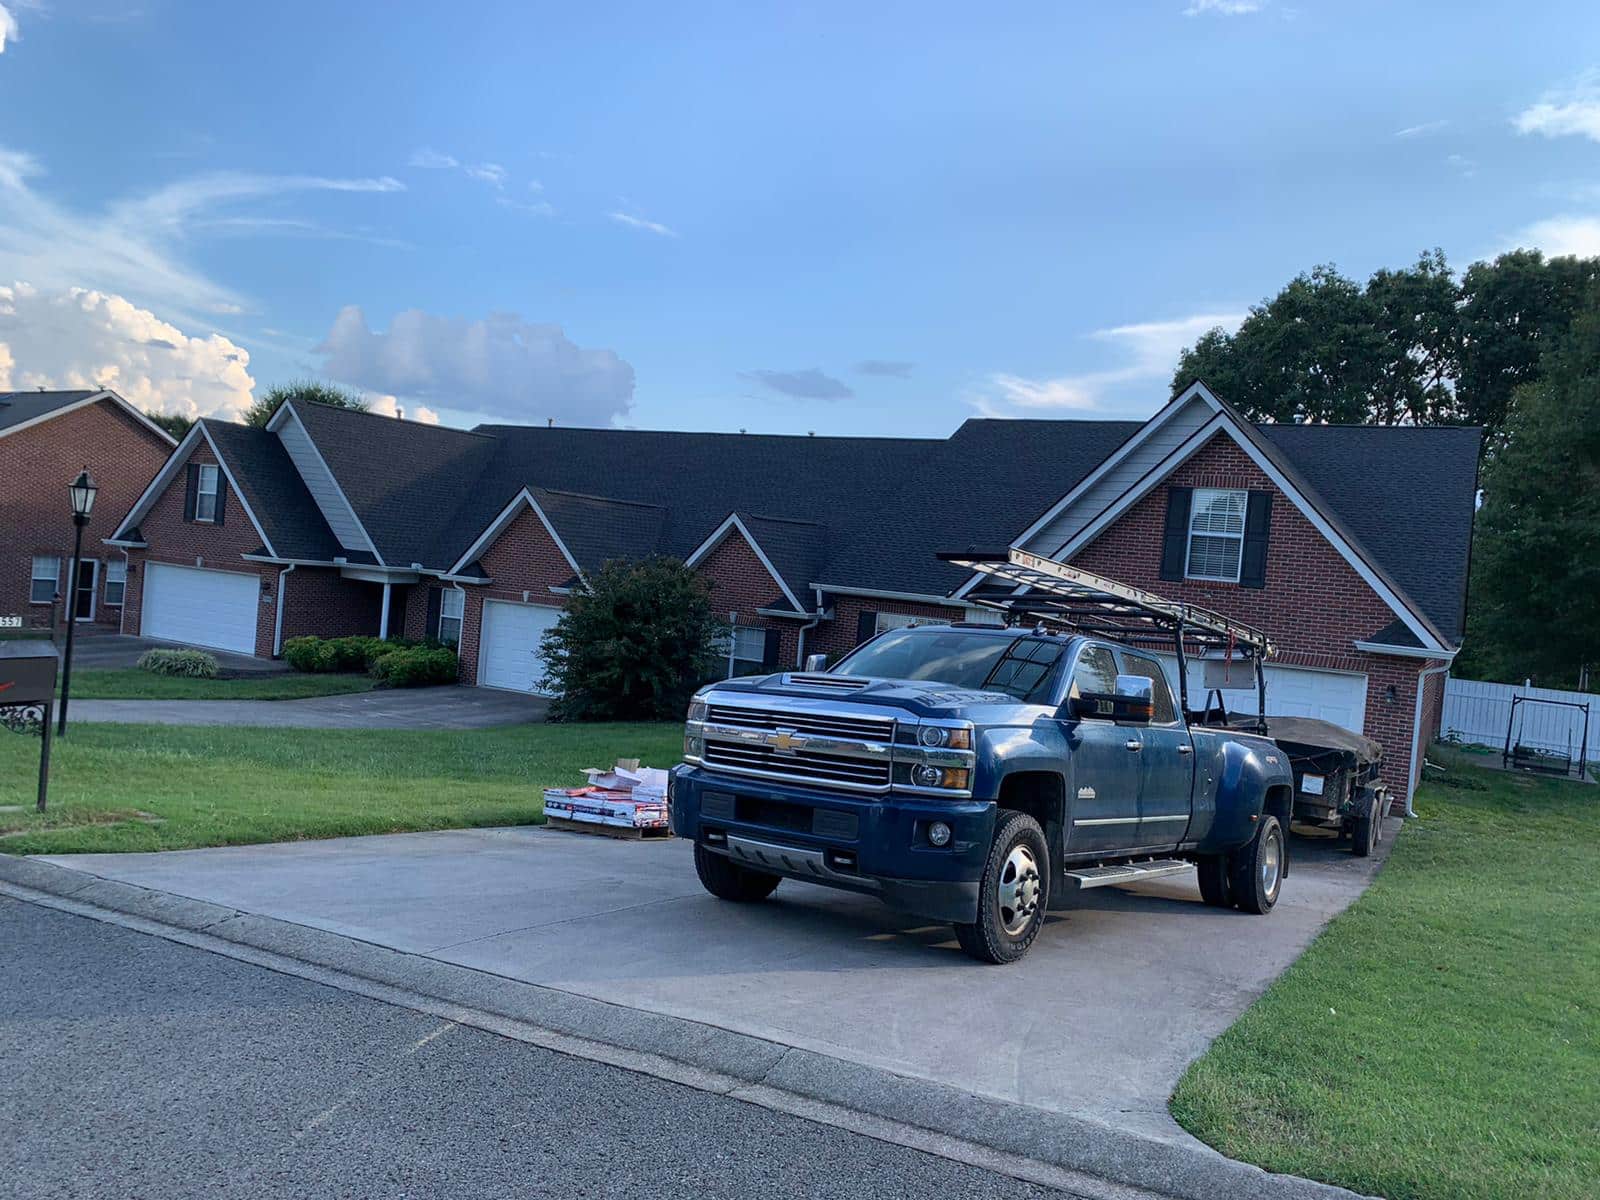 Blue Chevrolet Pickup Truck Used for Roofing Services in Bradley County, TN